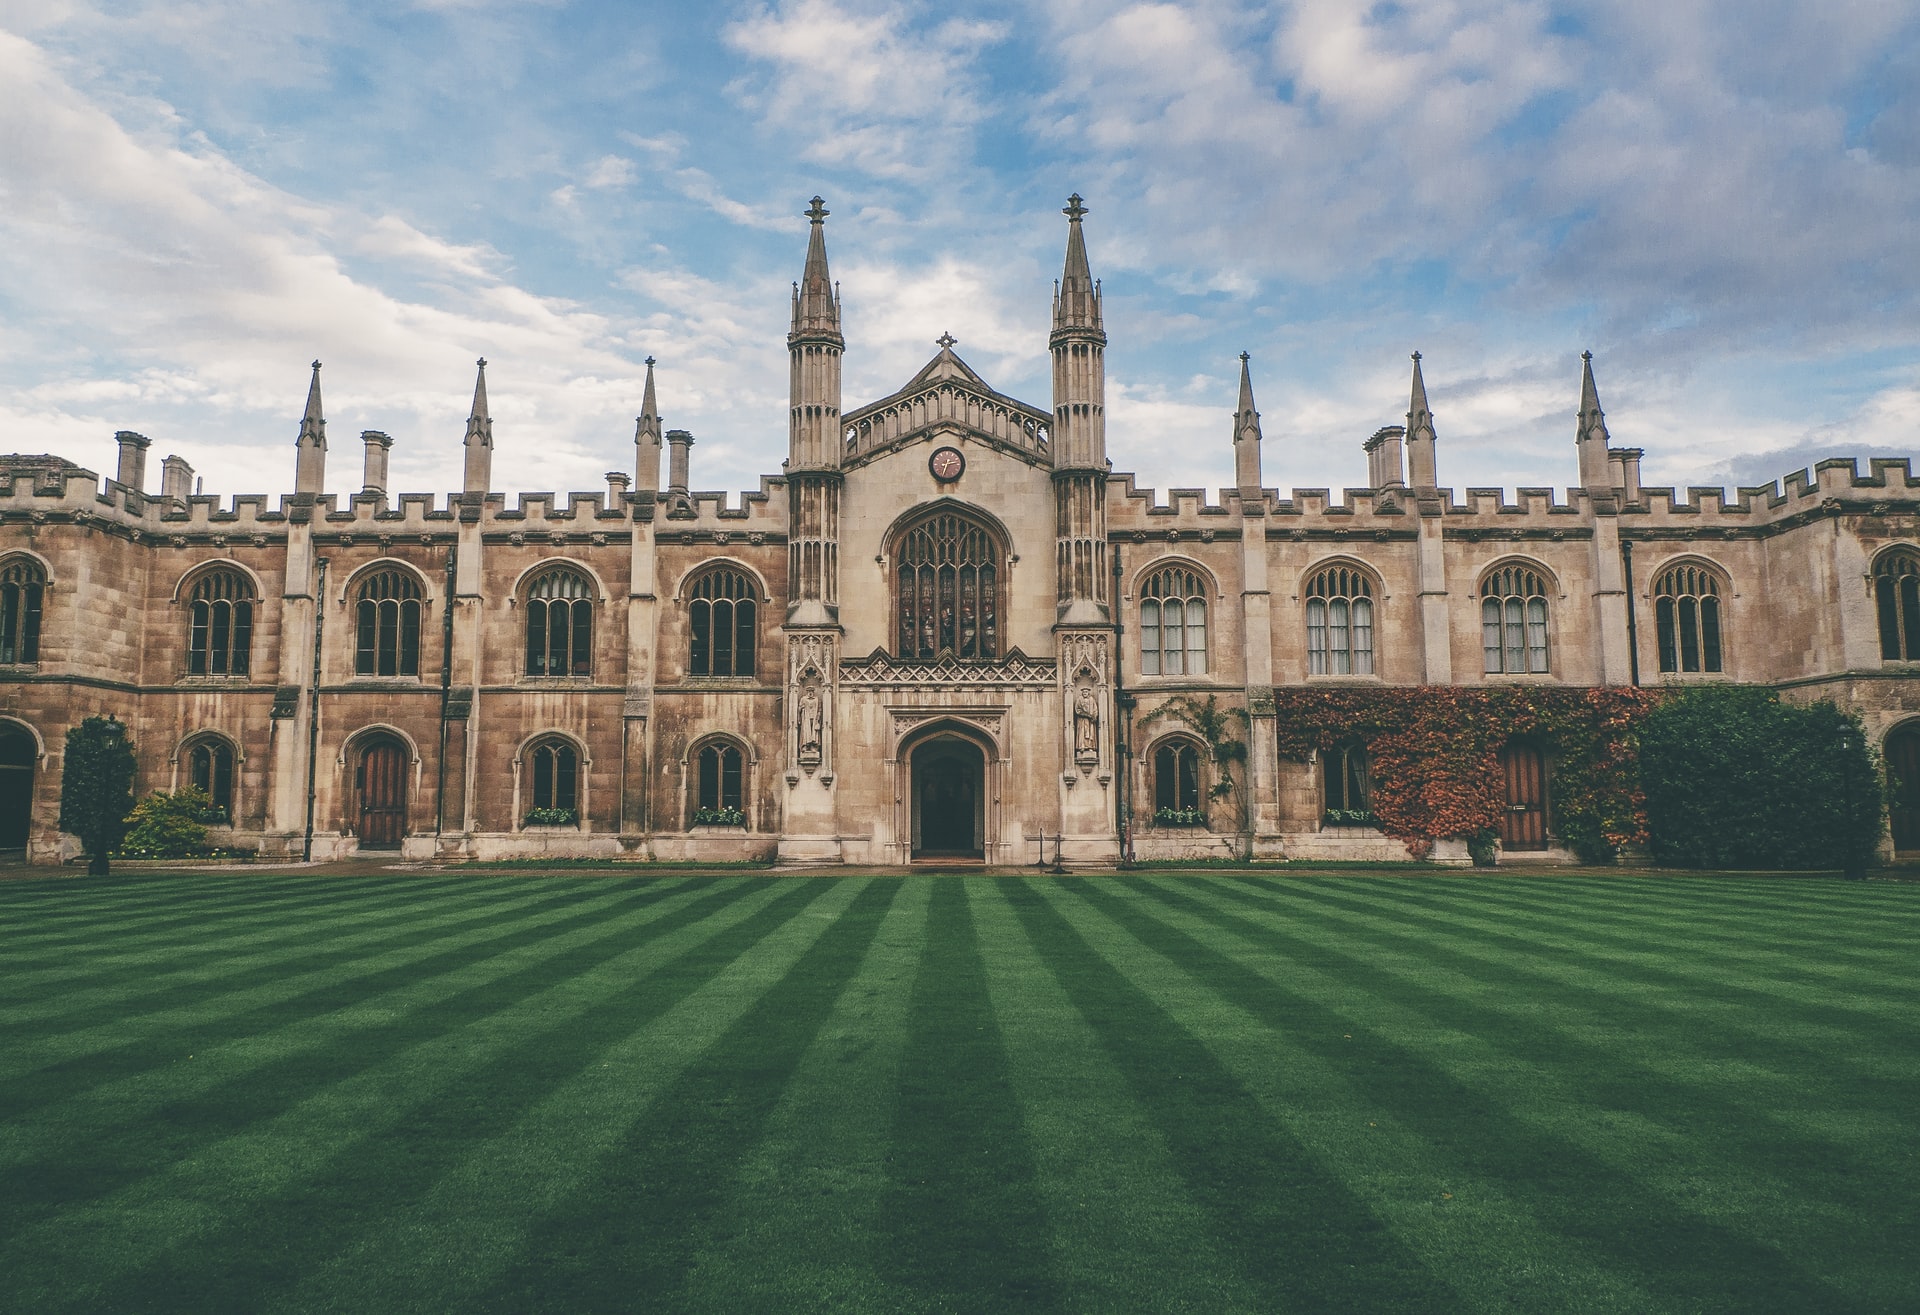 Where Can You Find The Best MBA Programs In London?